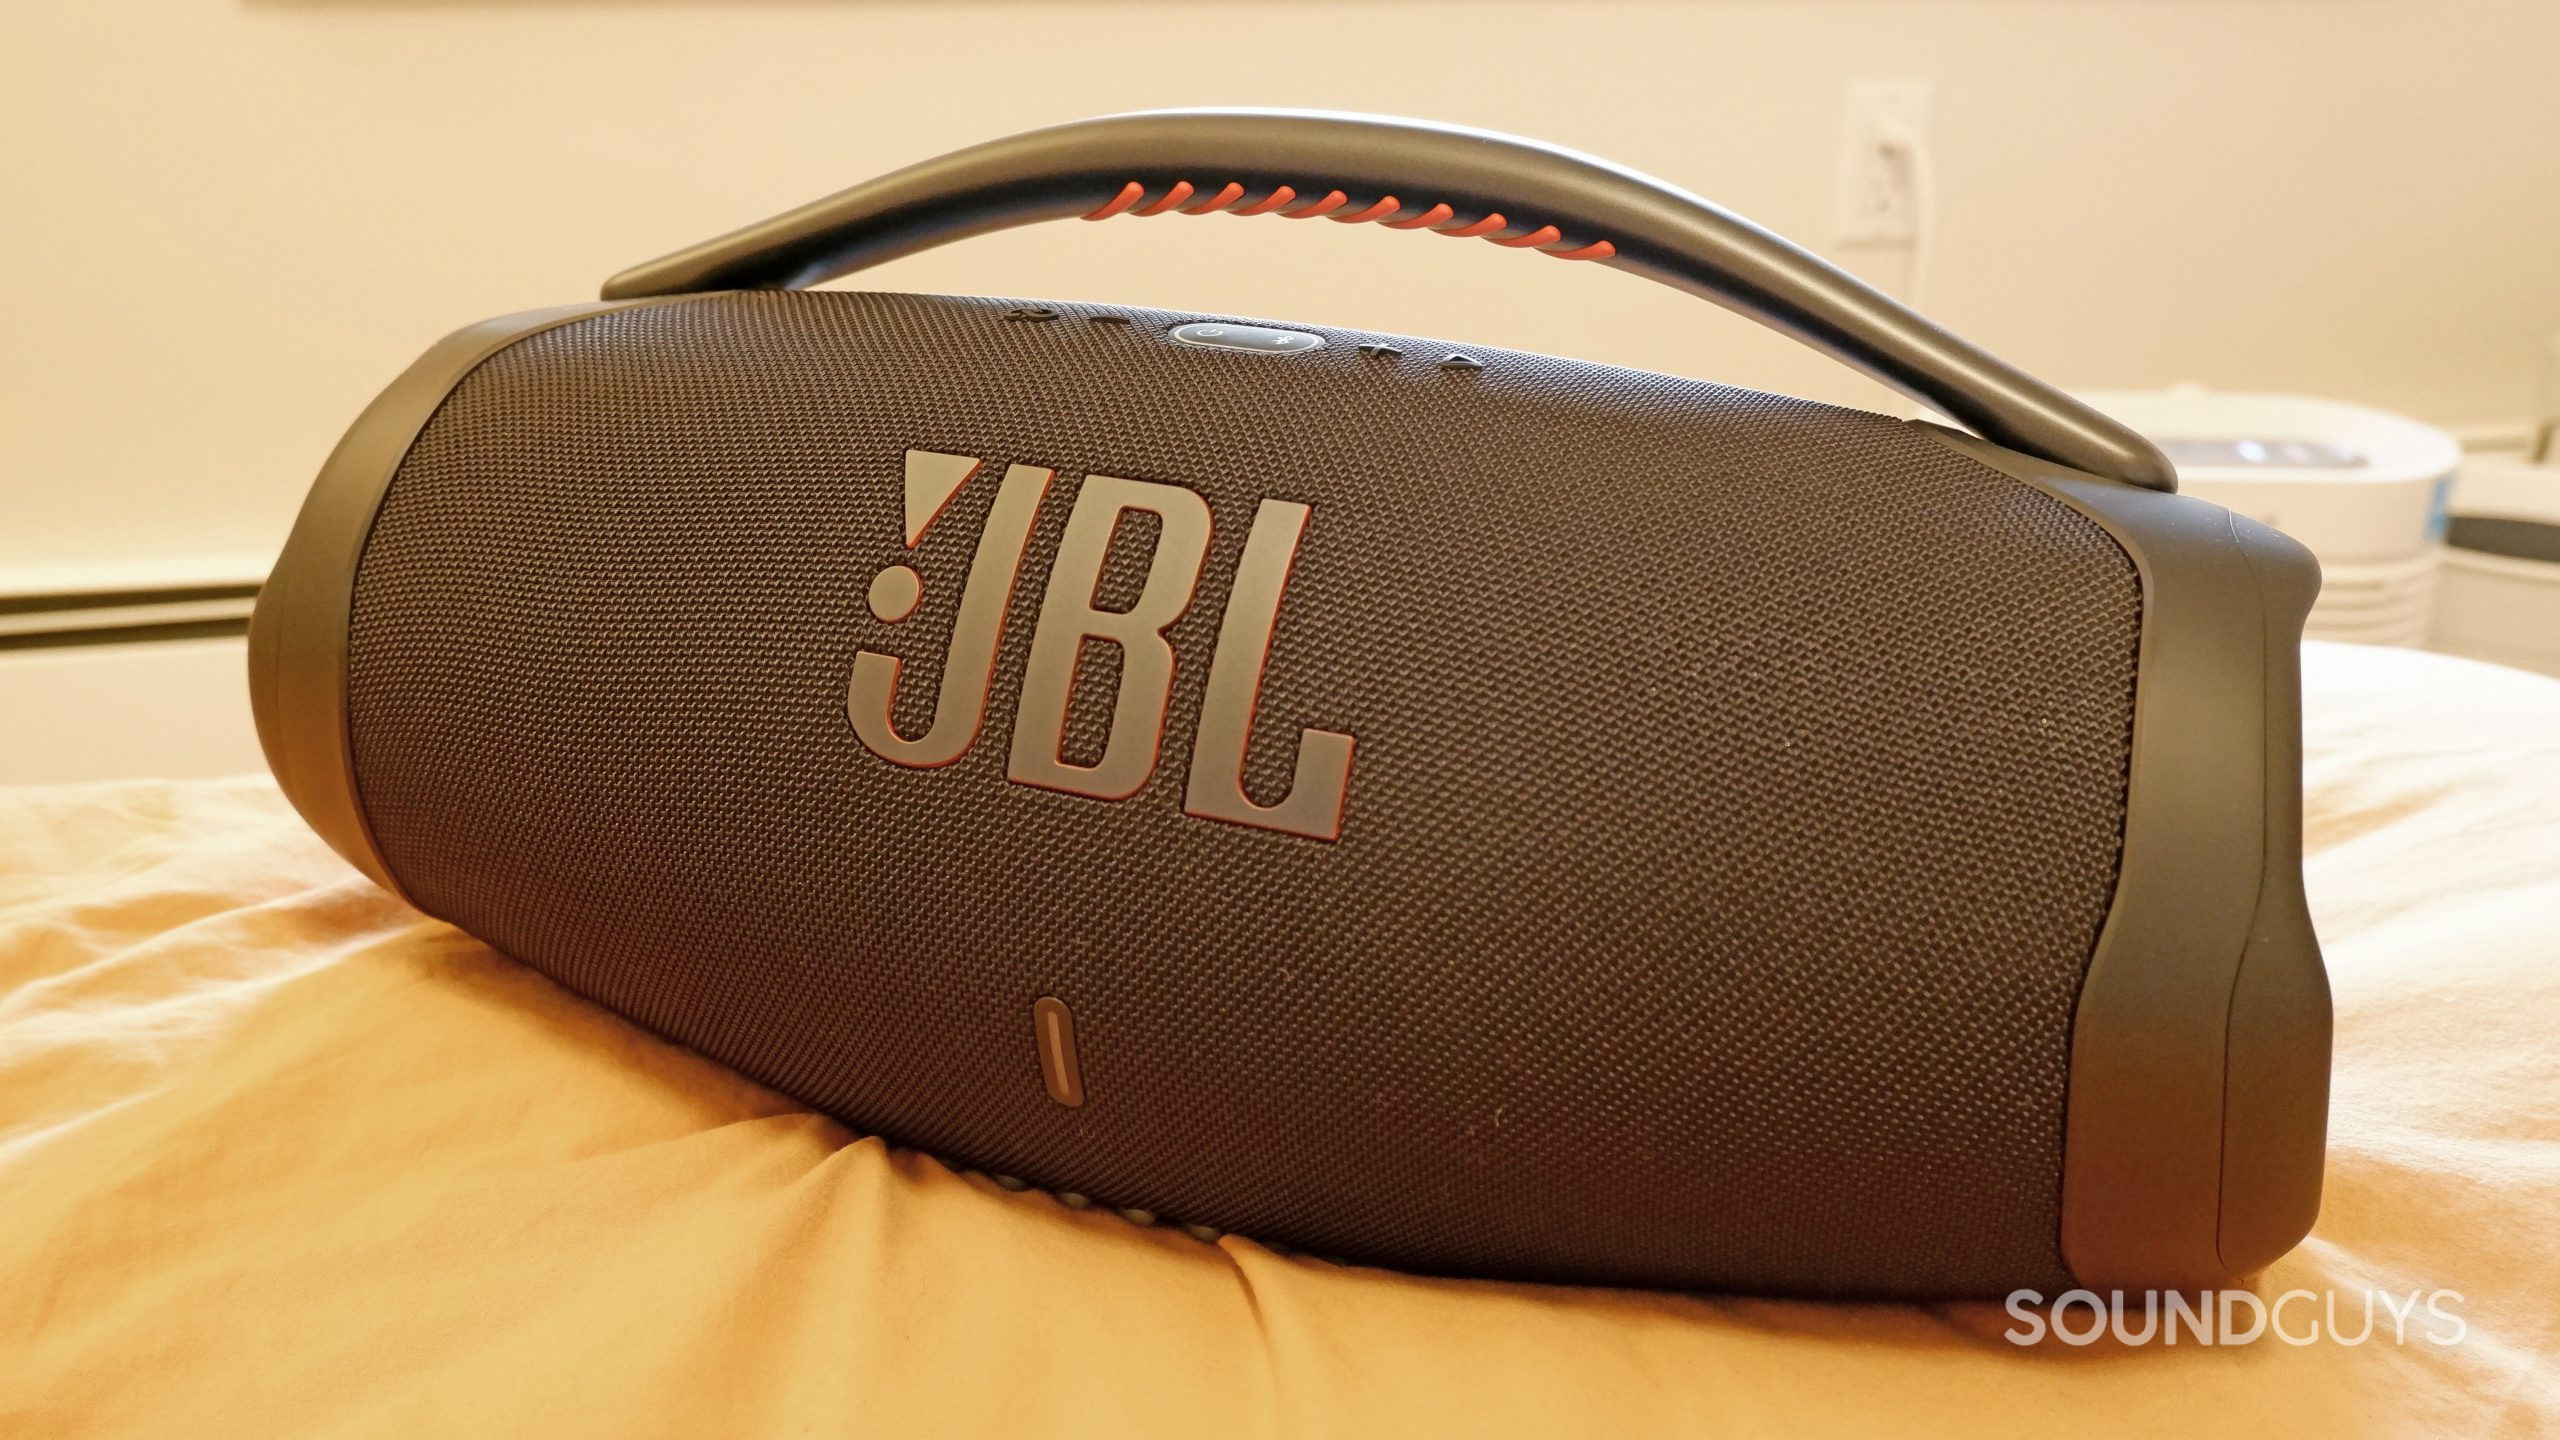 The JBL Boombox 3 sitting on a bed with yellow sheets.